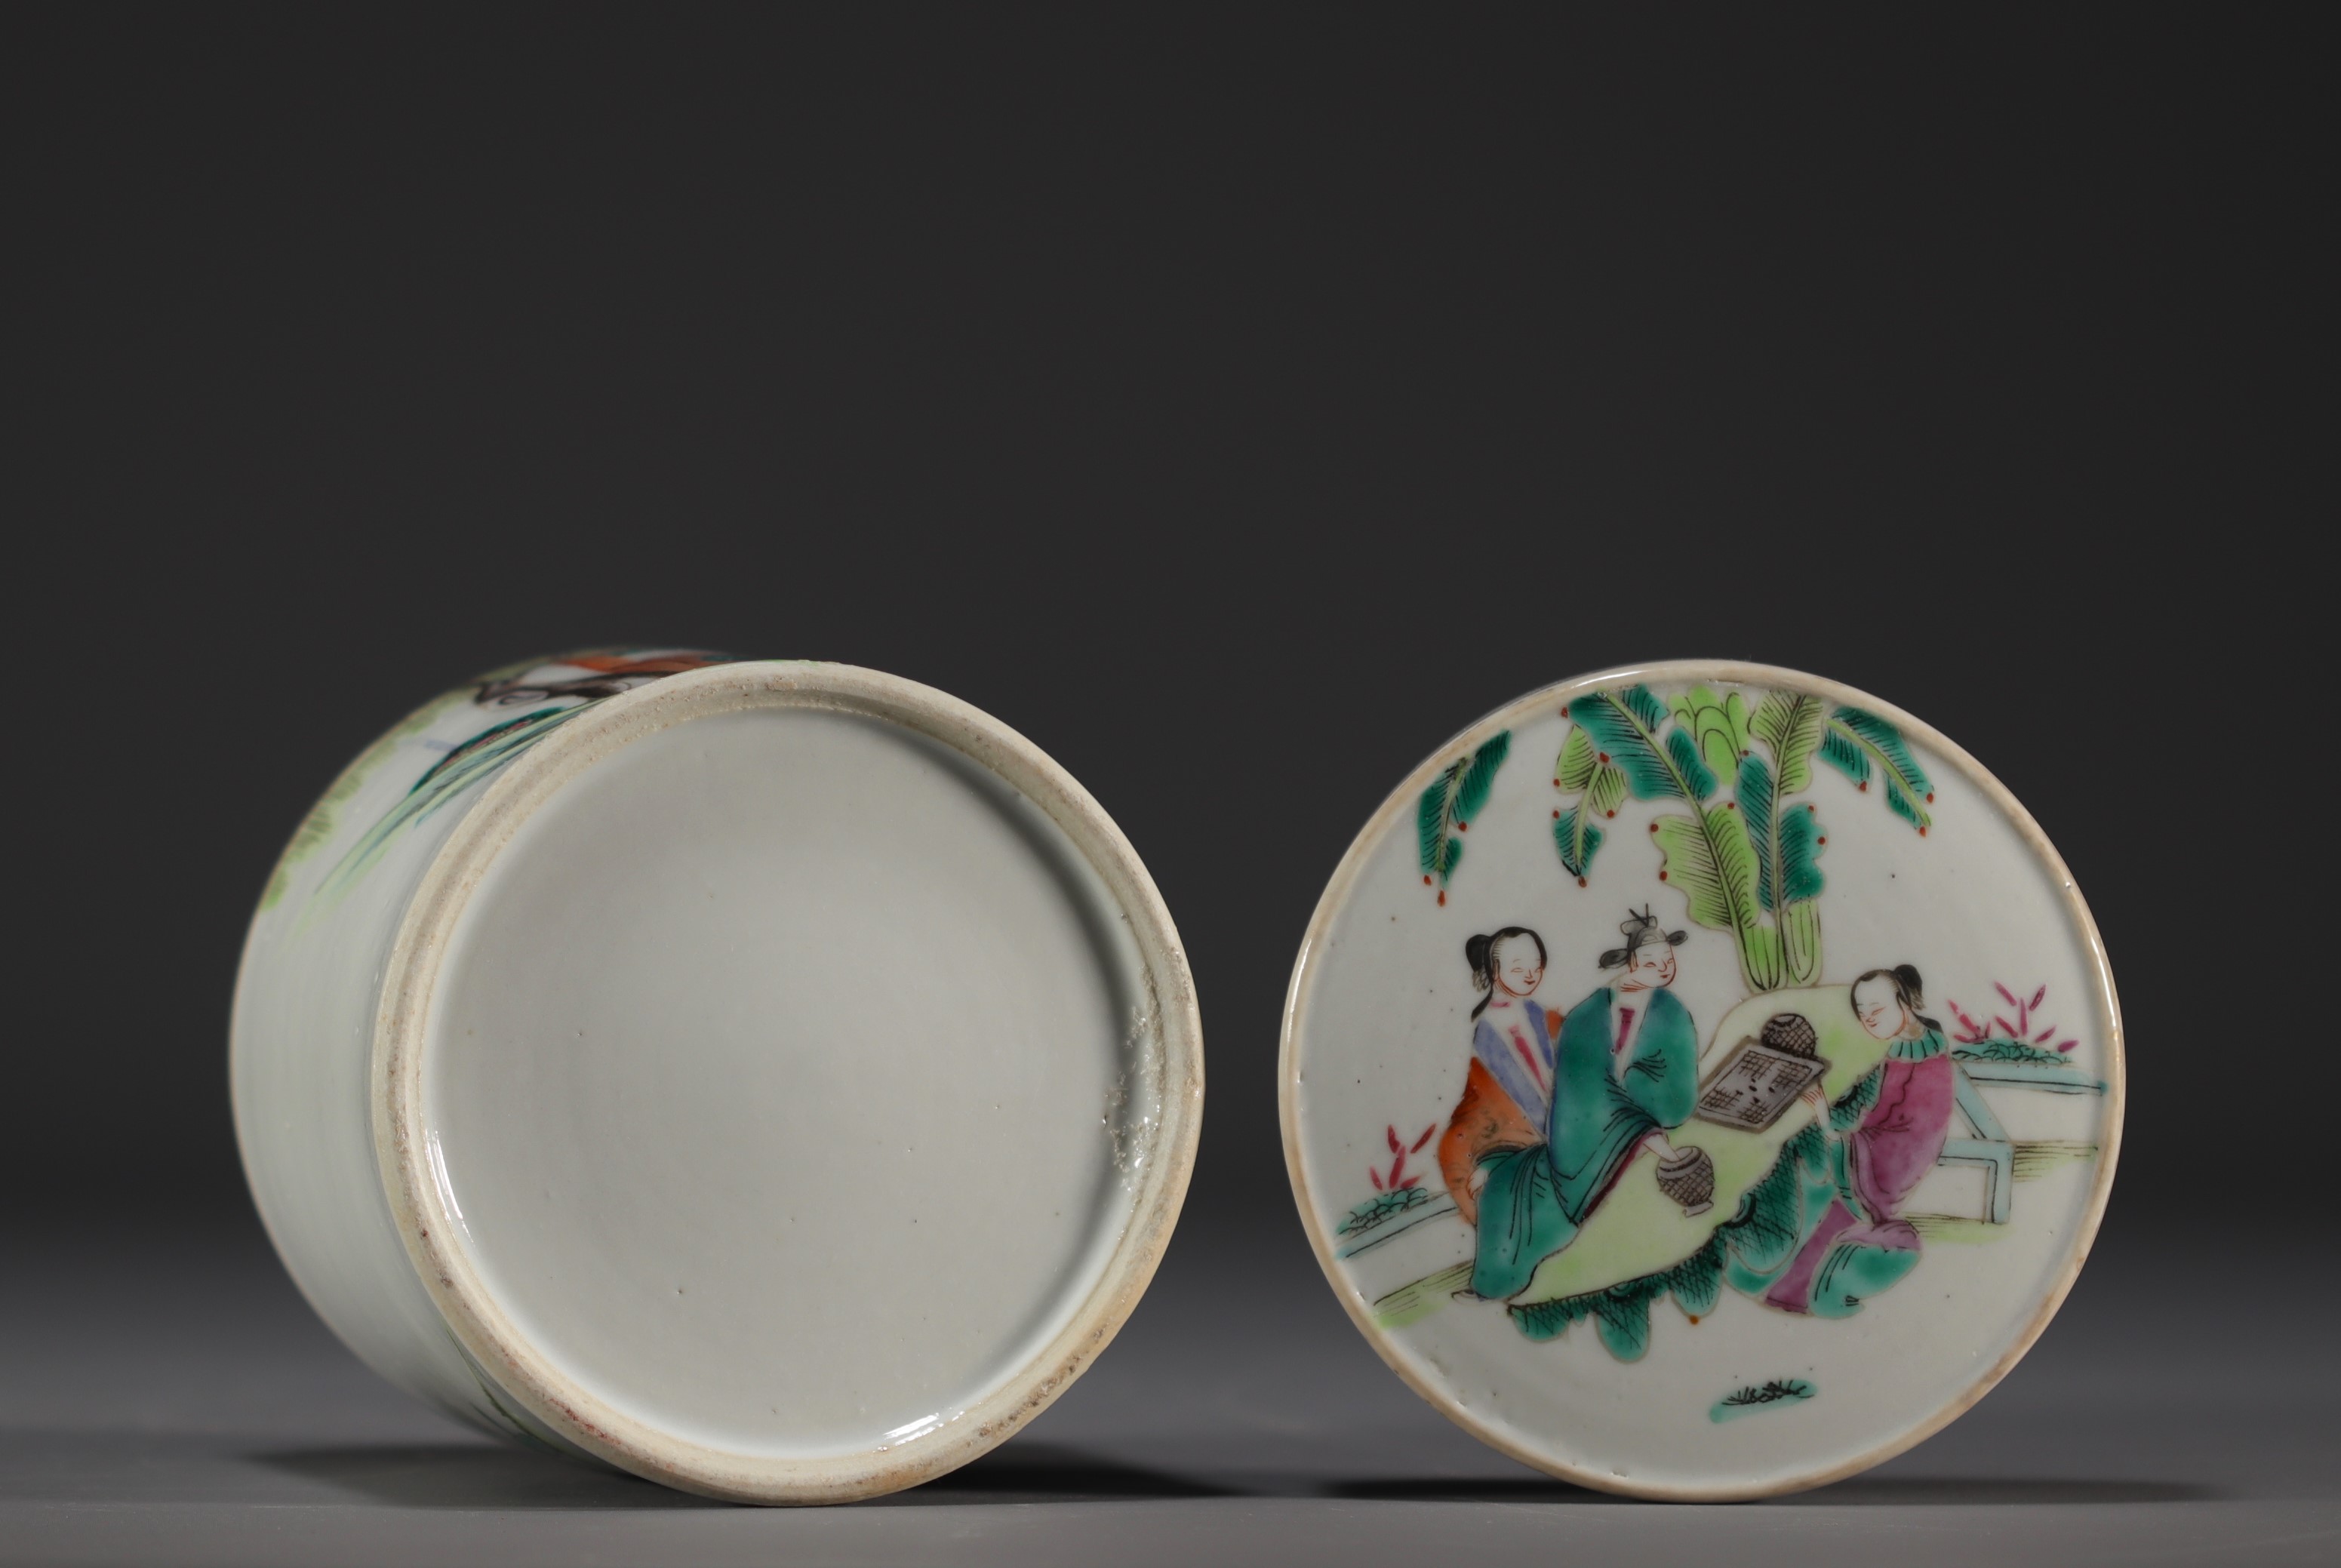 China - Famille rose porcelain box decorated with characters. - Image 4 of 4